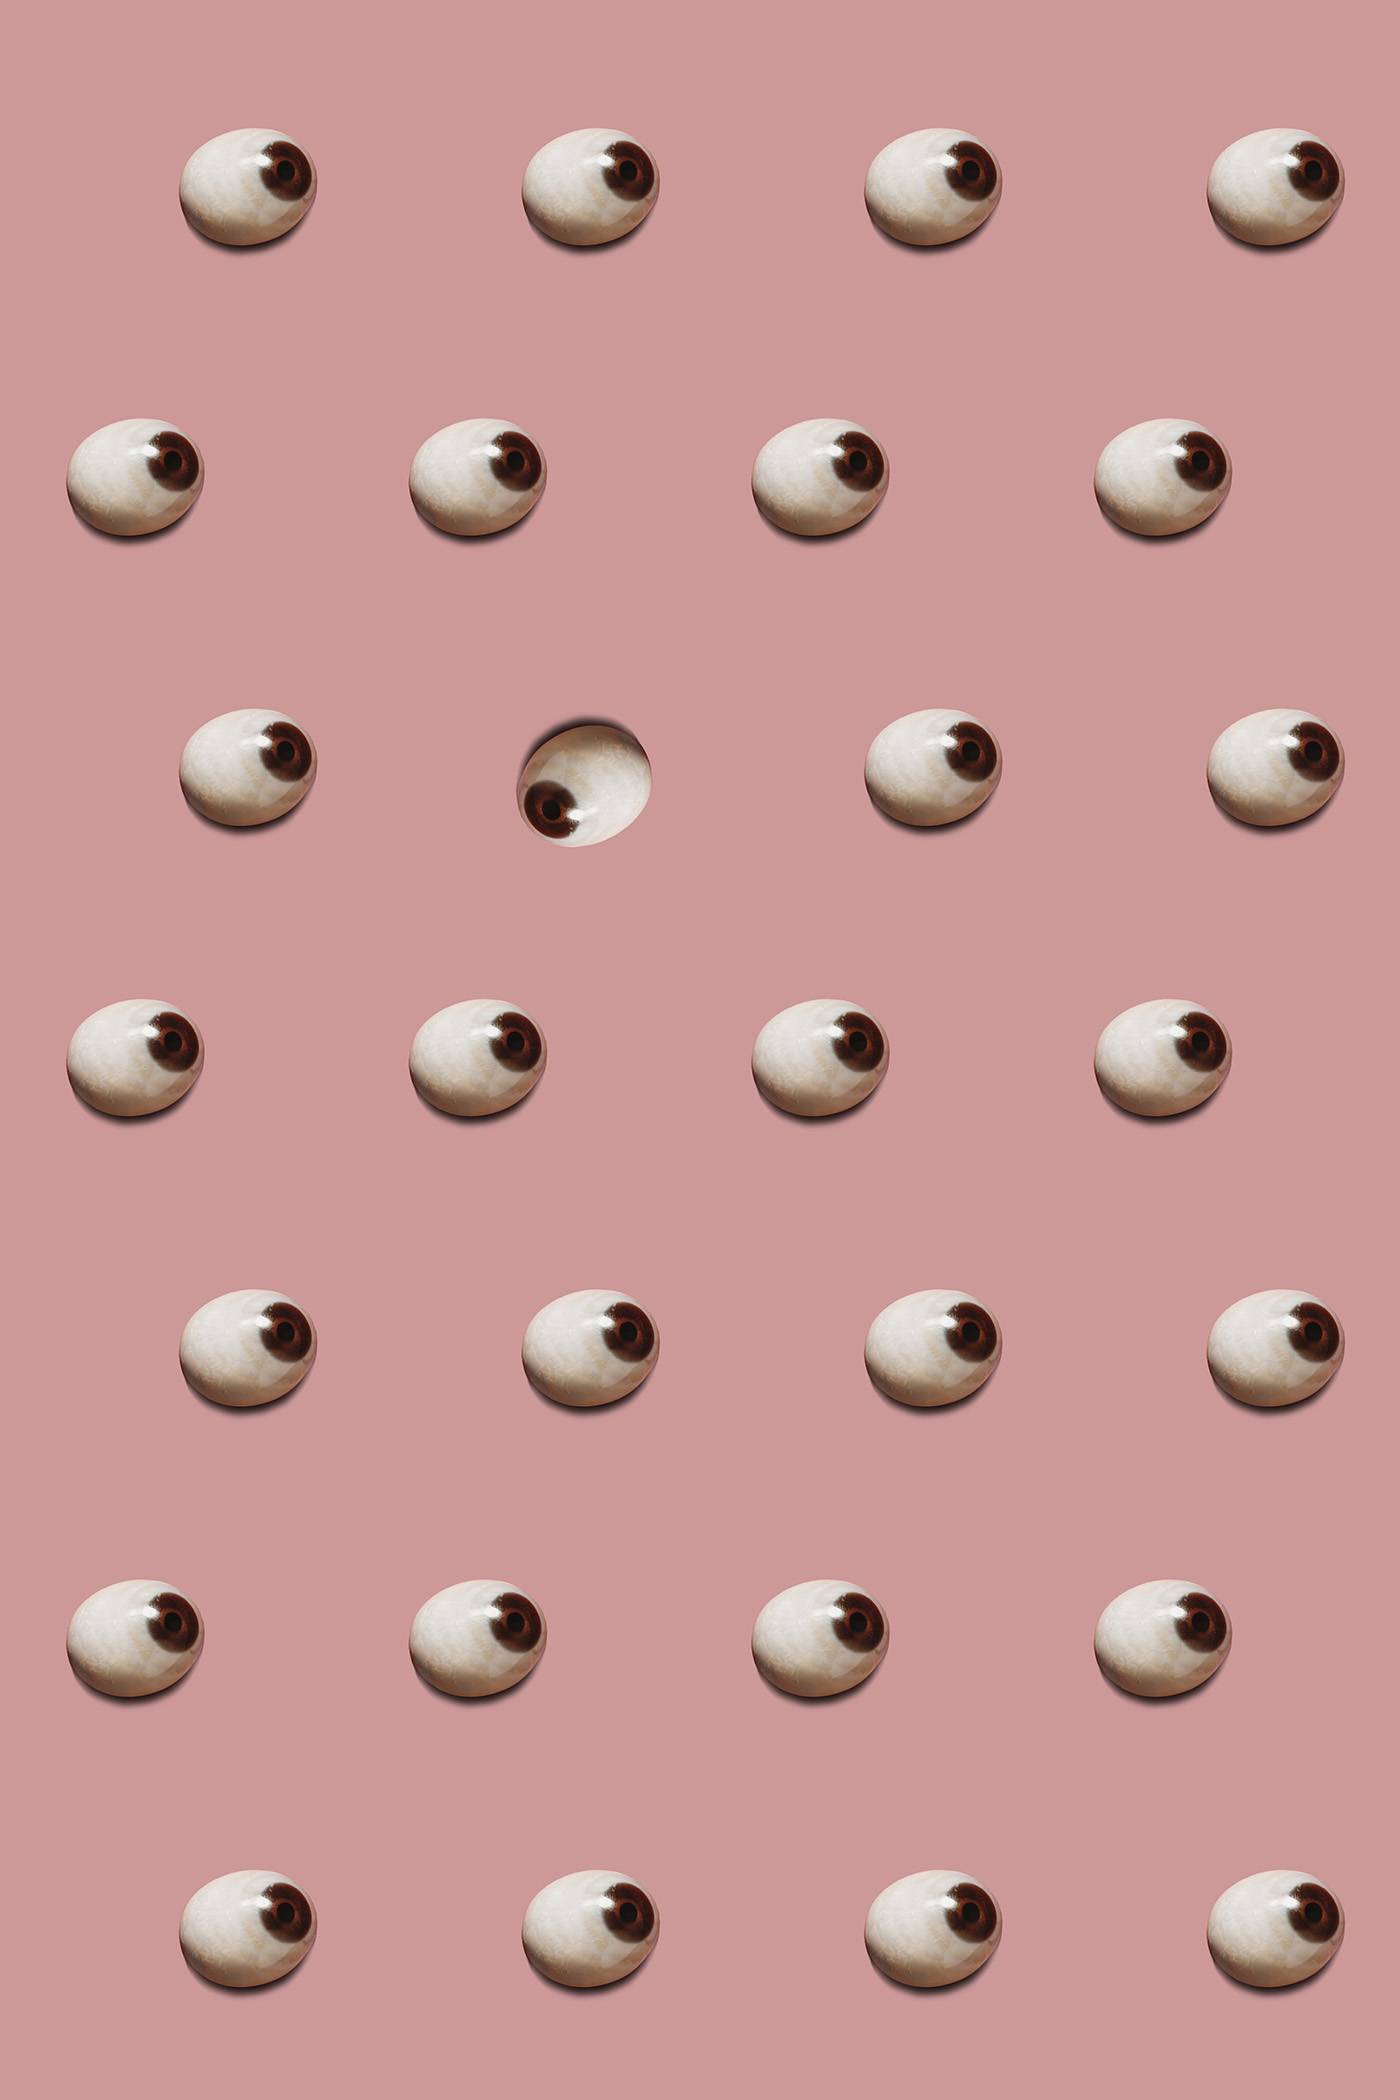 Pattern Of Eye Prosthesis repetition of eye prosthesis on pink background, one in the other direction then the other